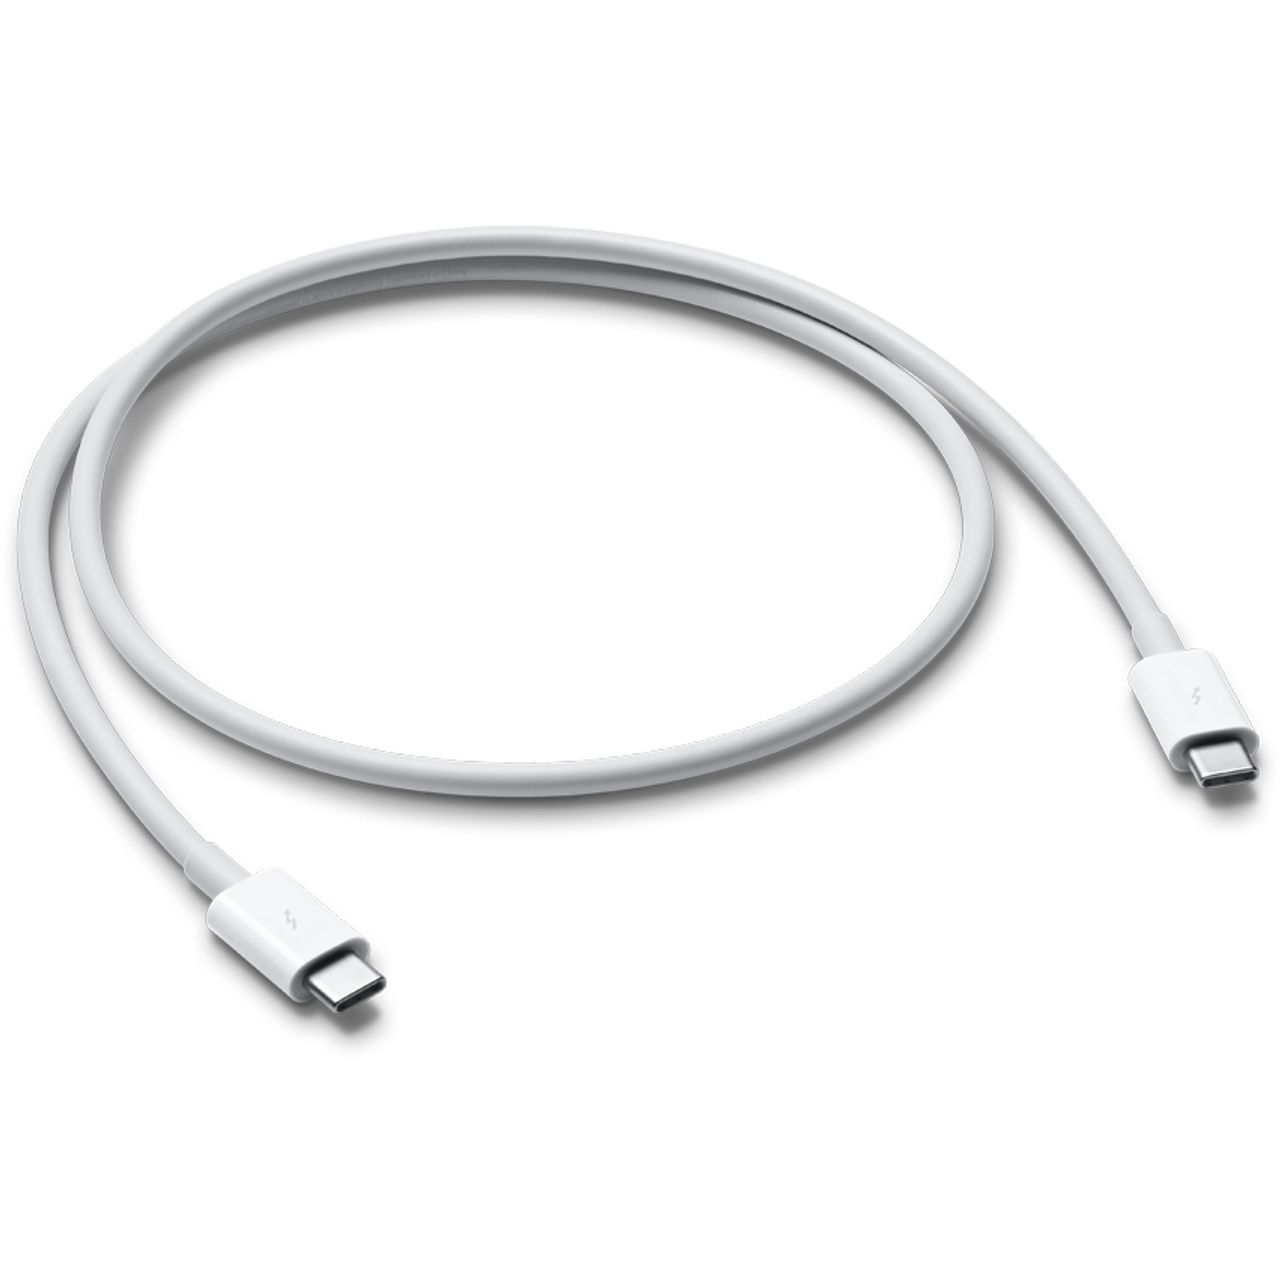 Apple Thunderbolt 3 (USB-C) Cable (0.8m) Review